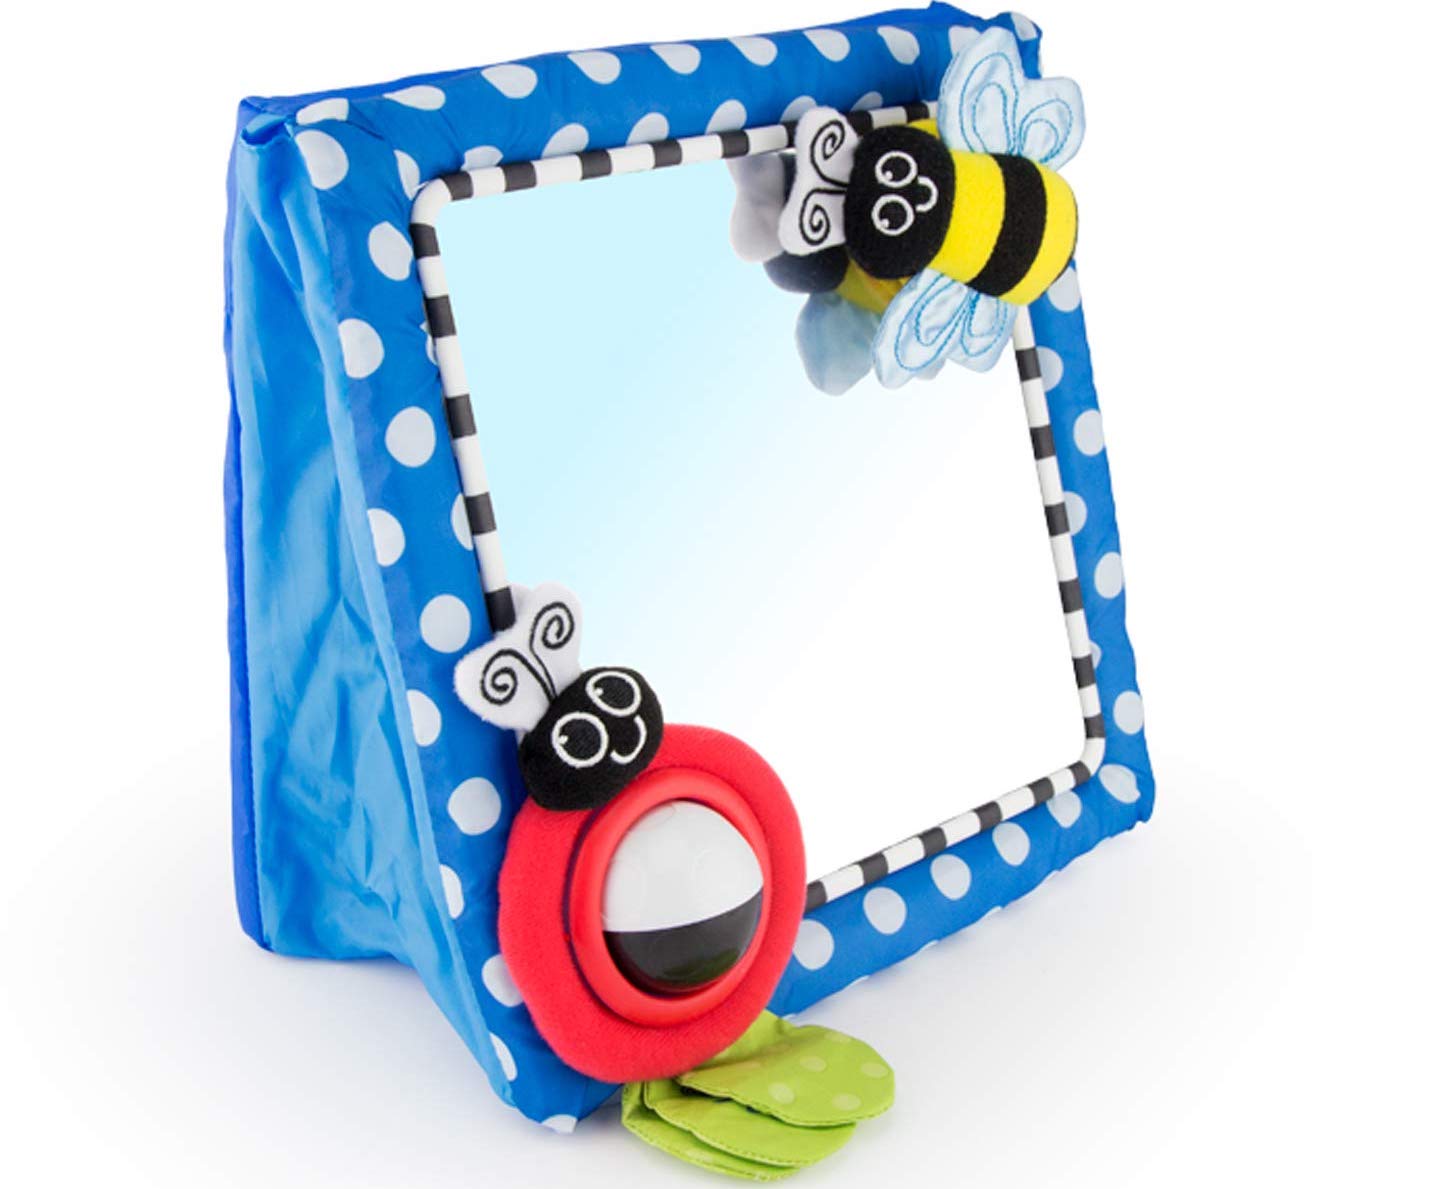 Blue framed mirror with white polka dots and a bumble bee and ladybug attached to corners. 